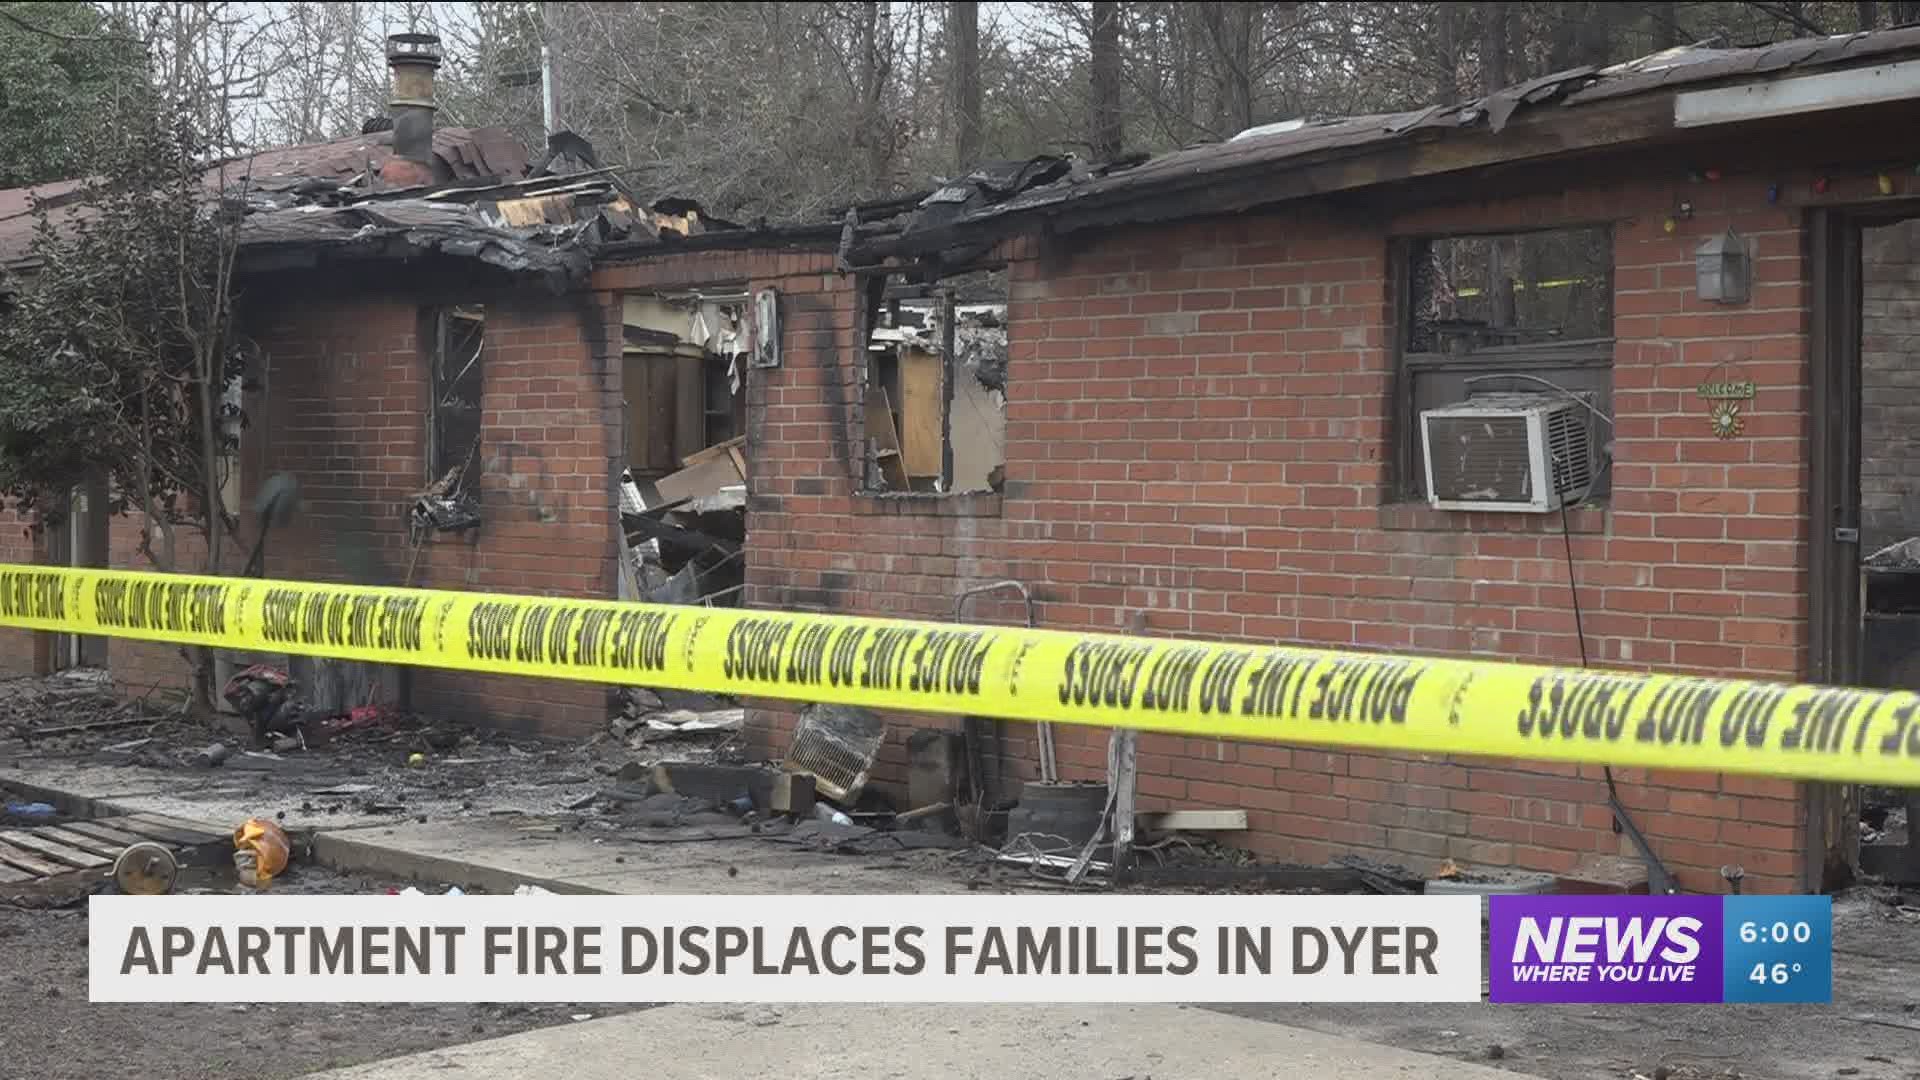 An apartment fire has displaced several families in Dyer.